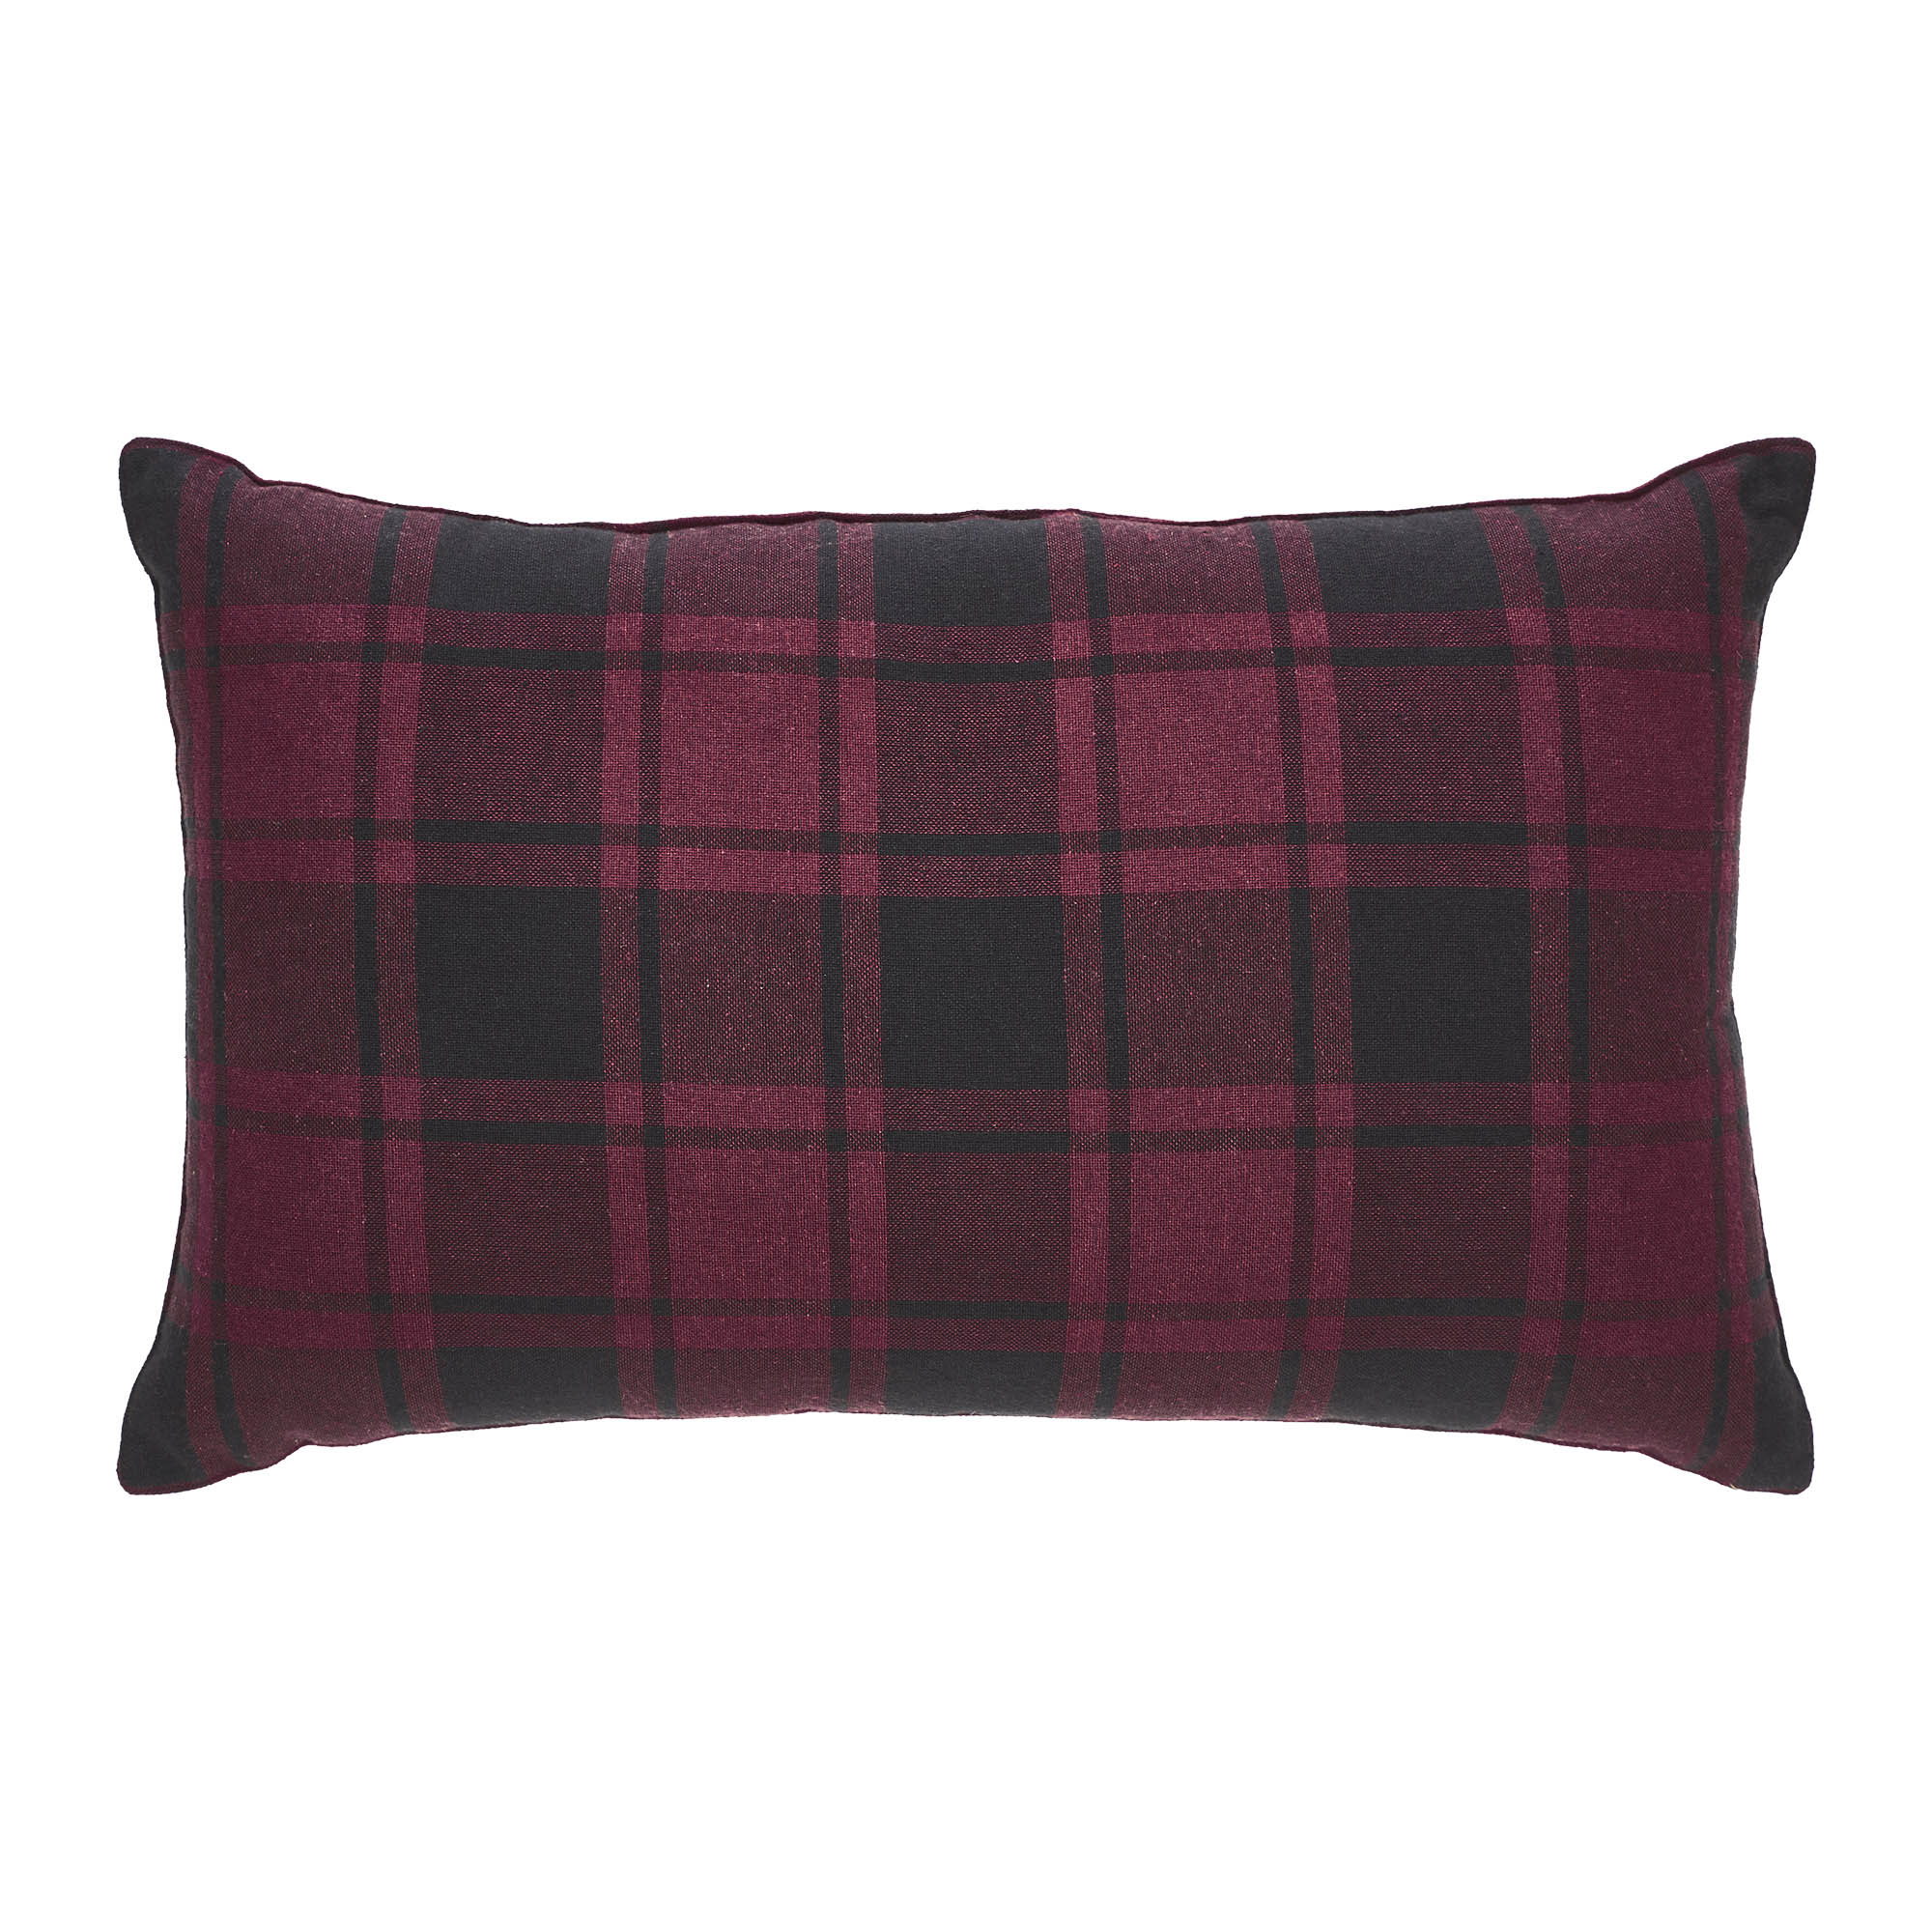 Cumberland Red Black Plaid Winter Forest Pillow 14x22 - 84103